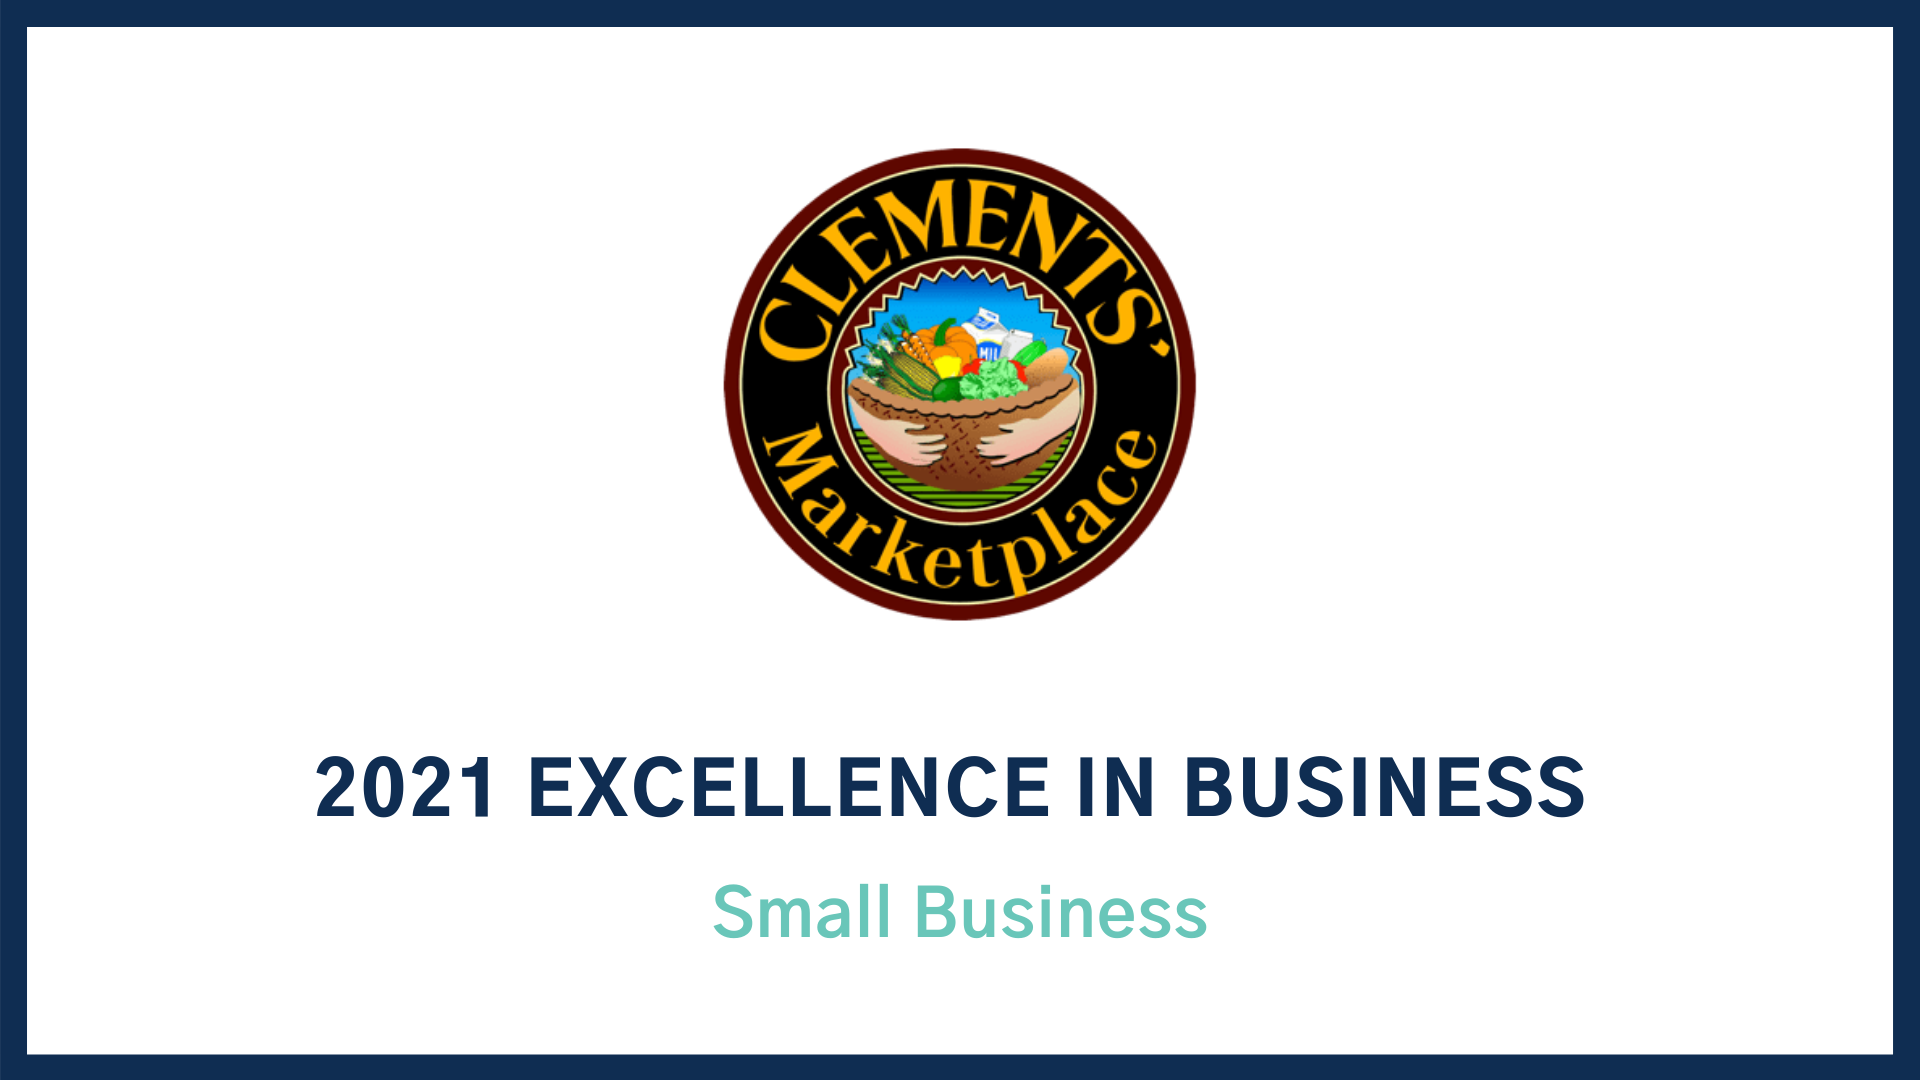 2021 Excellence in Business Award: Small Business Clement's Marketplace